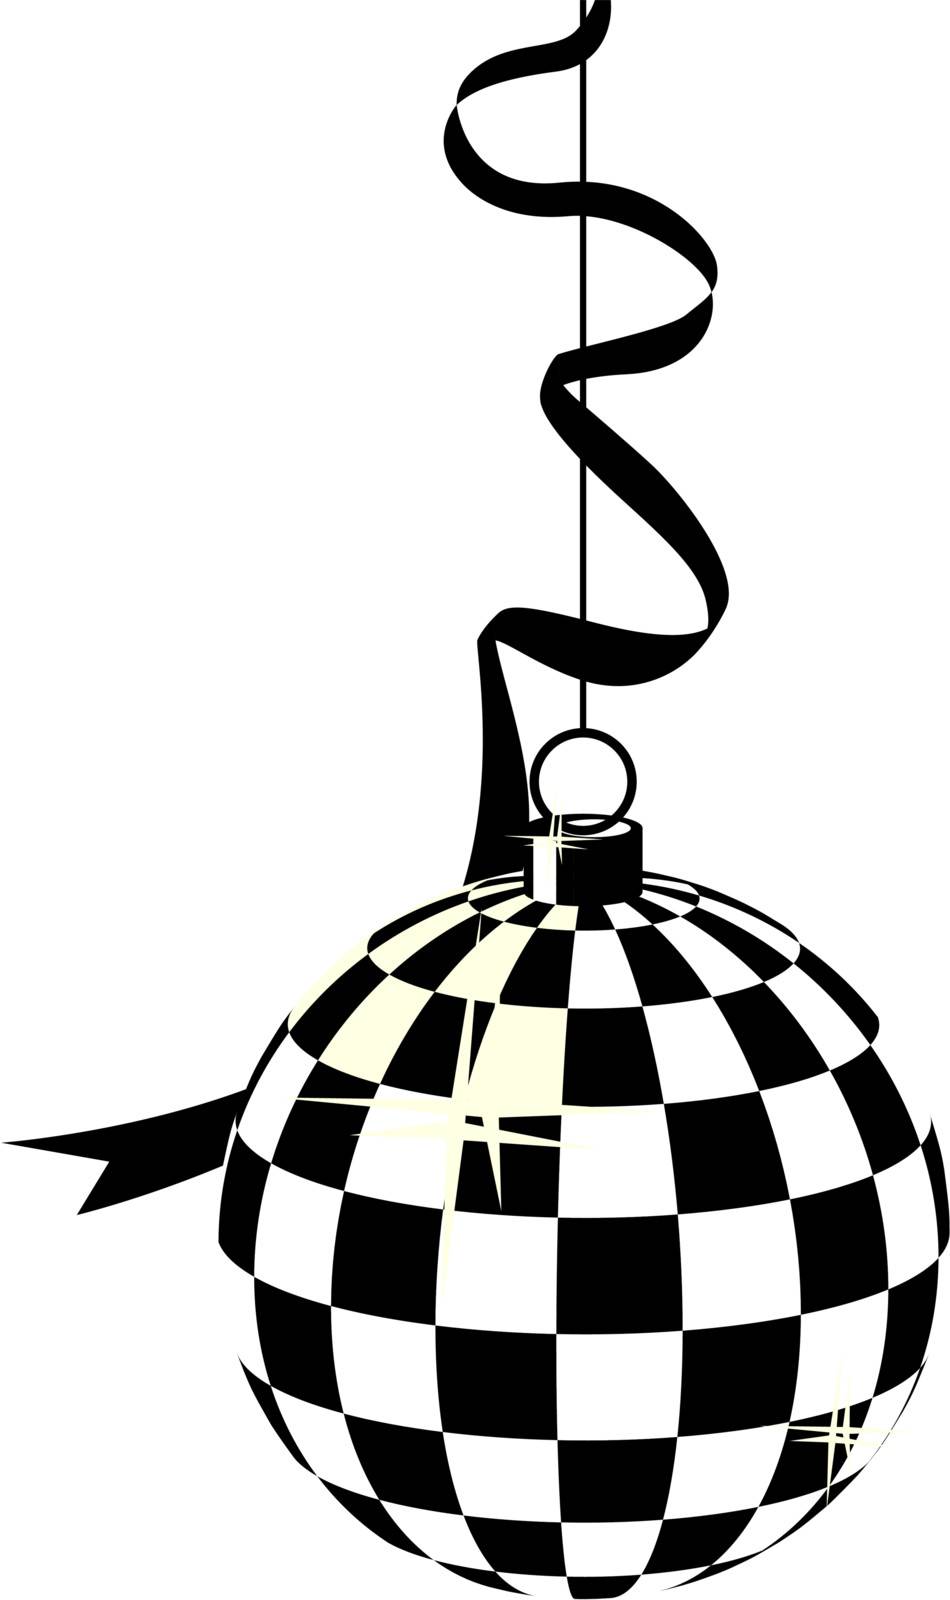 Stylized black-and-white hanging disco ball and ribbon